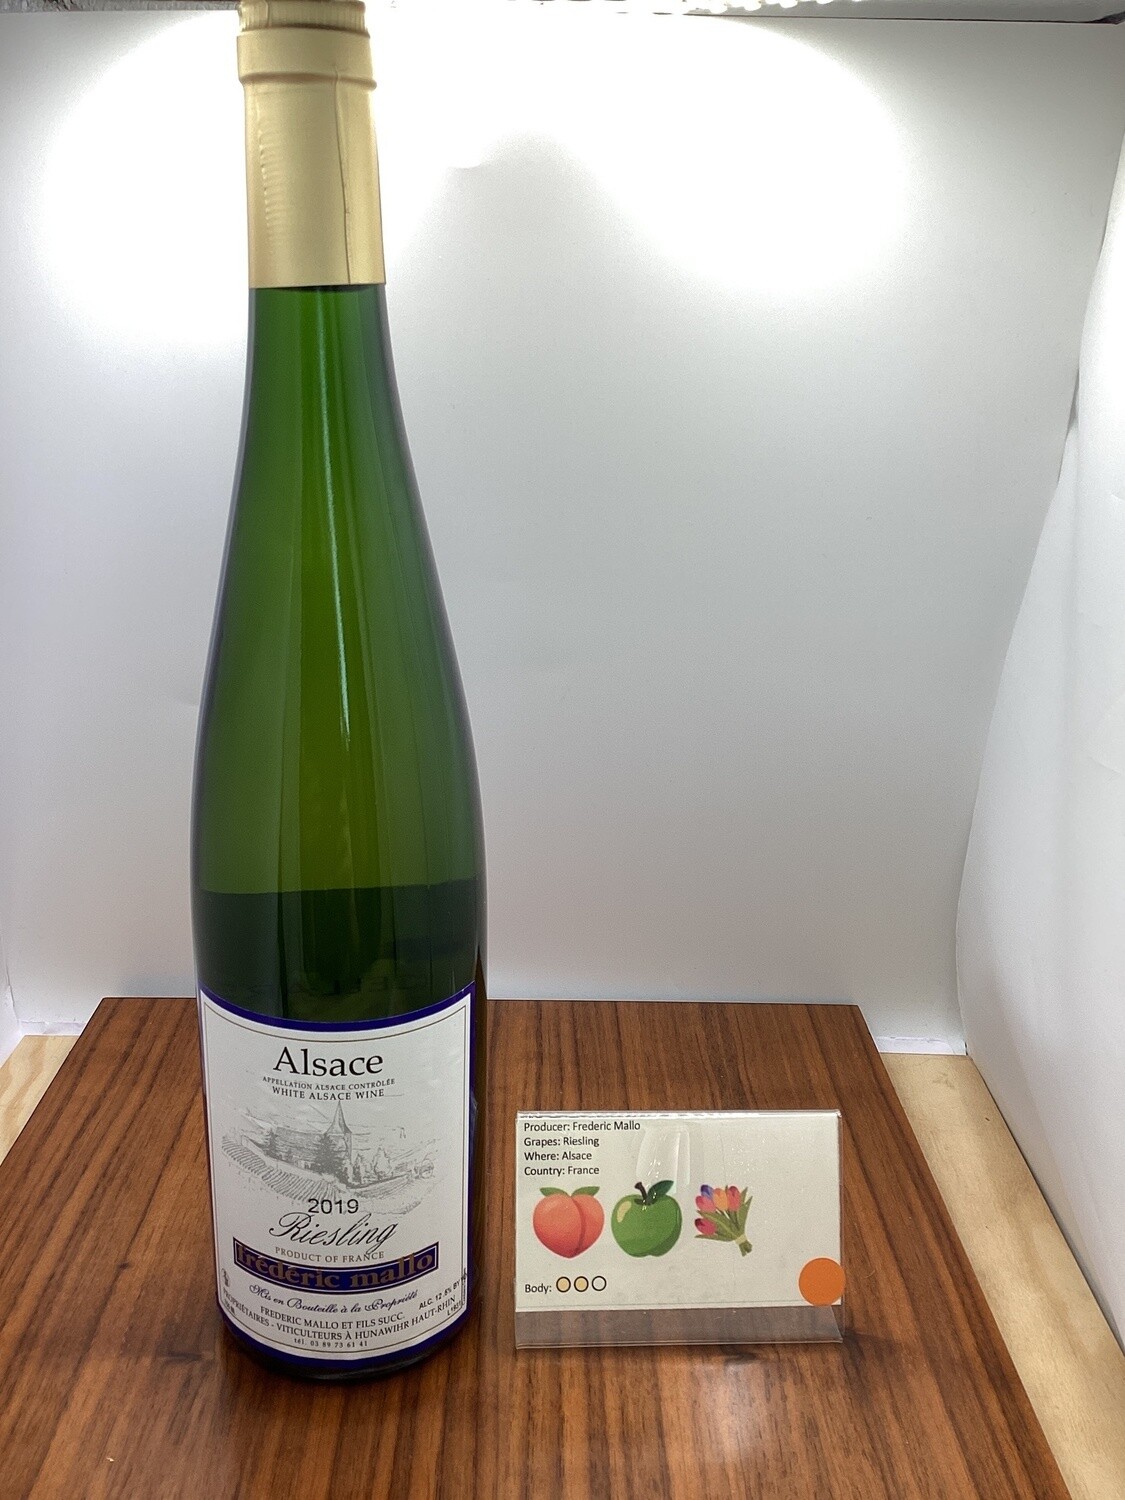 Frederic Mallo, Riesling, Alsace, France 2019